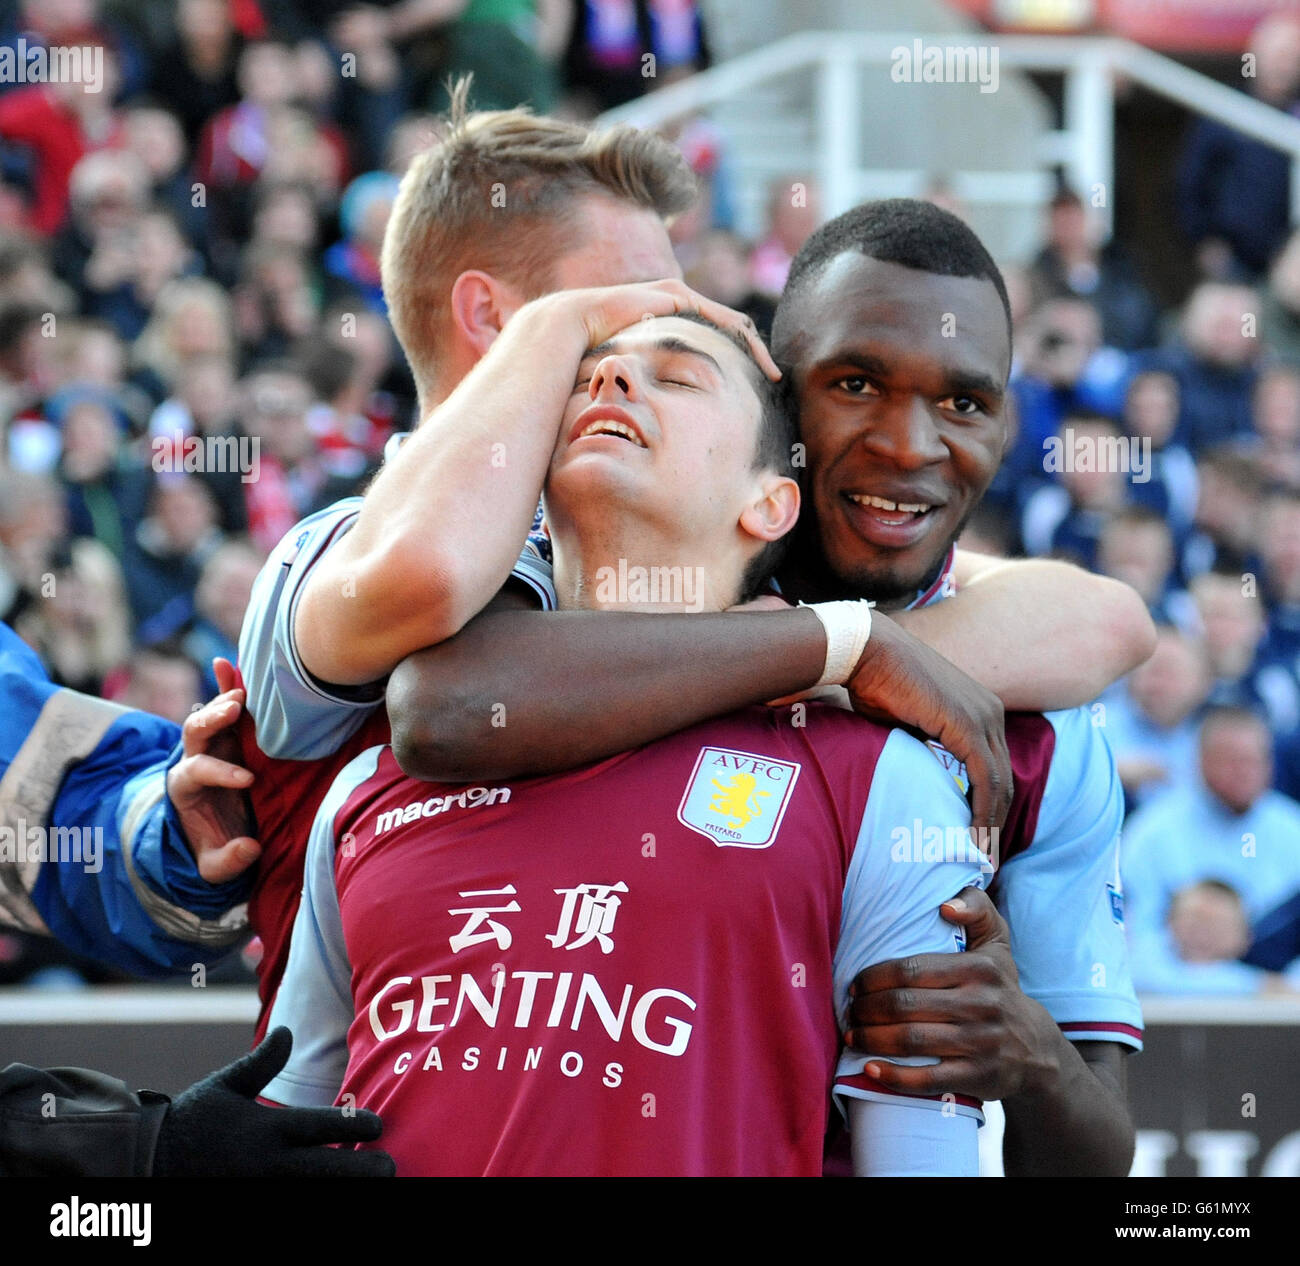 Aston Villa's Matthew Lowton is congratulated by Christian Benteke on scoring their second goal during the Barclays Premier League match at the Britannia Stadium, Stoke on Trent. Stock Photo